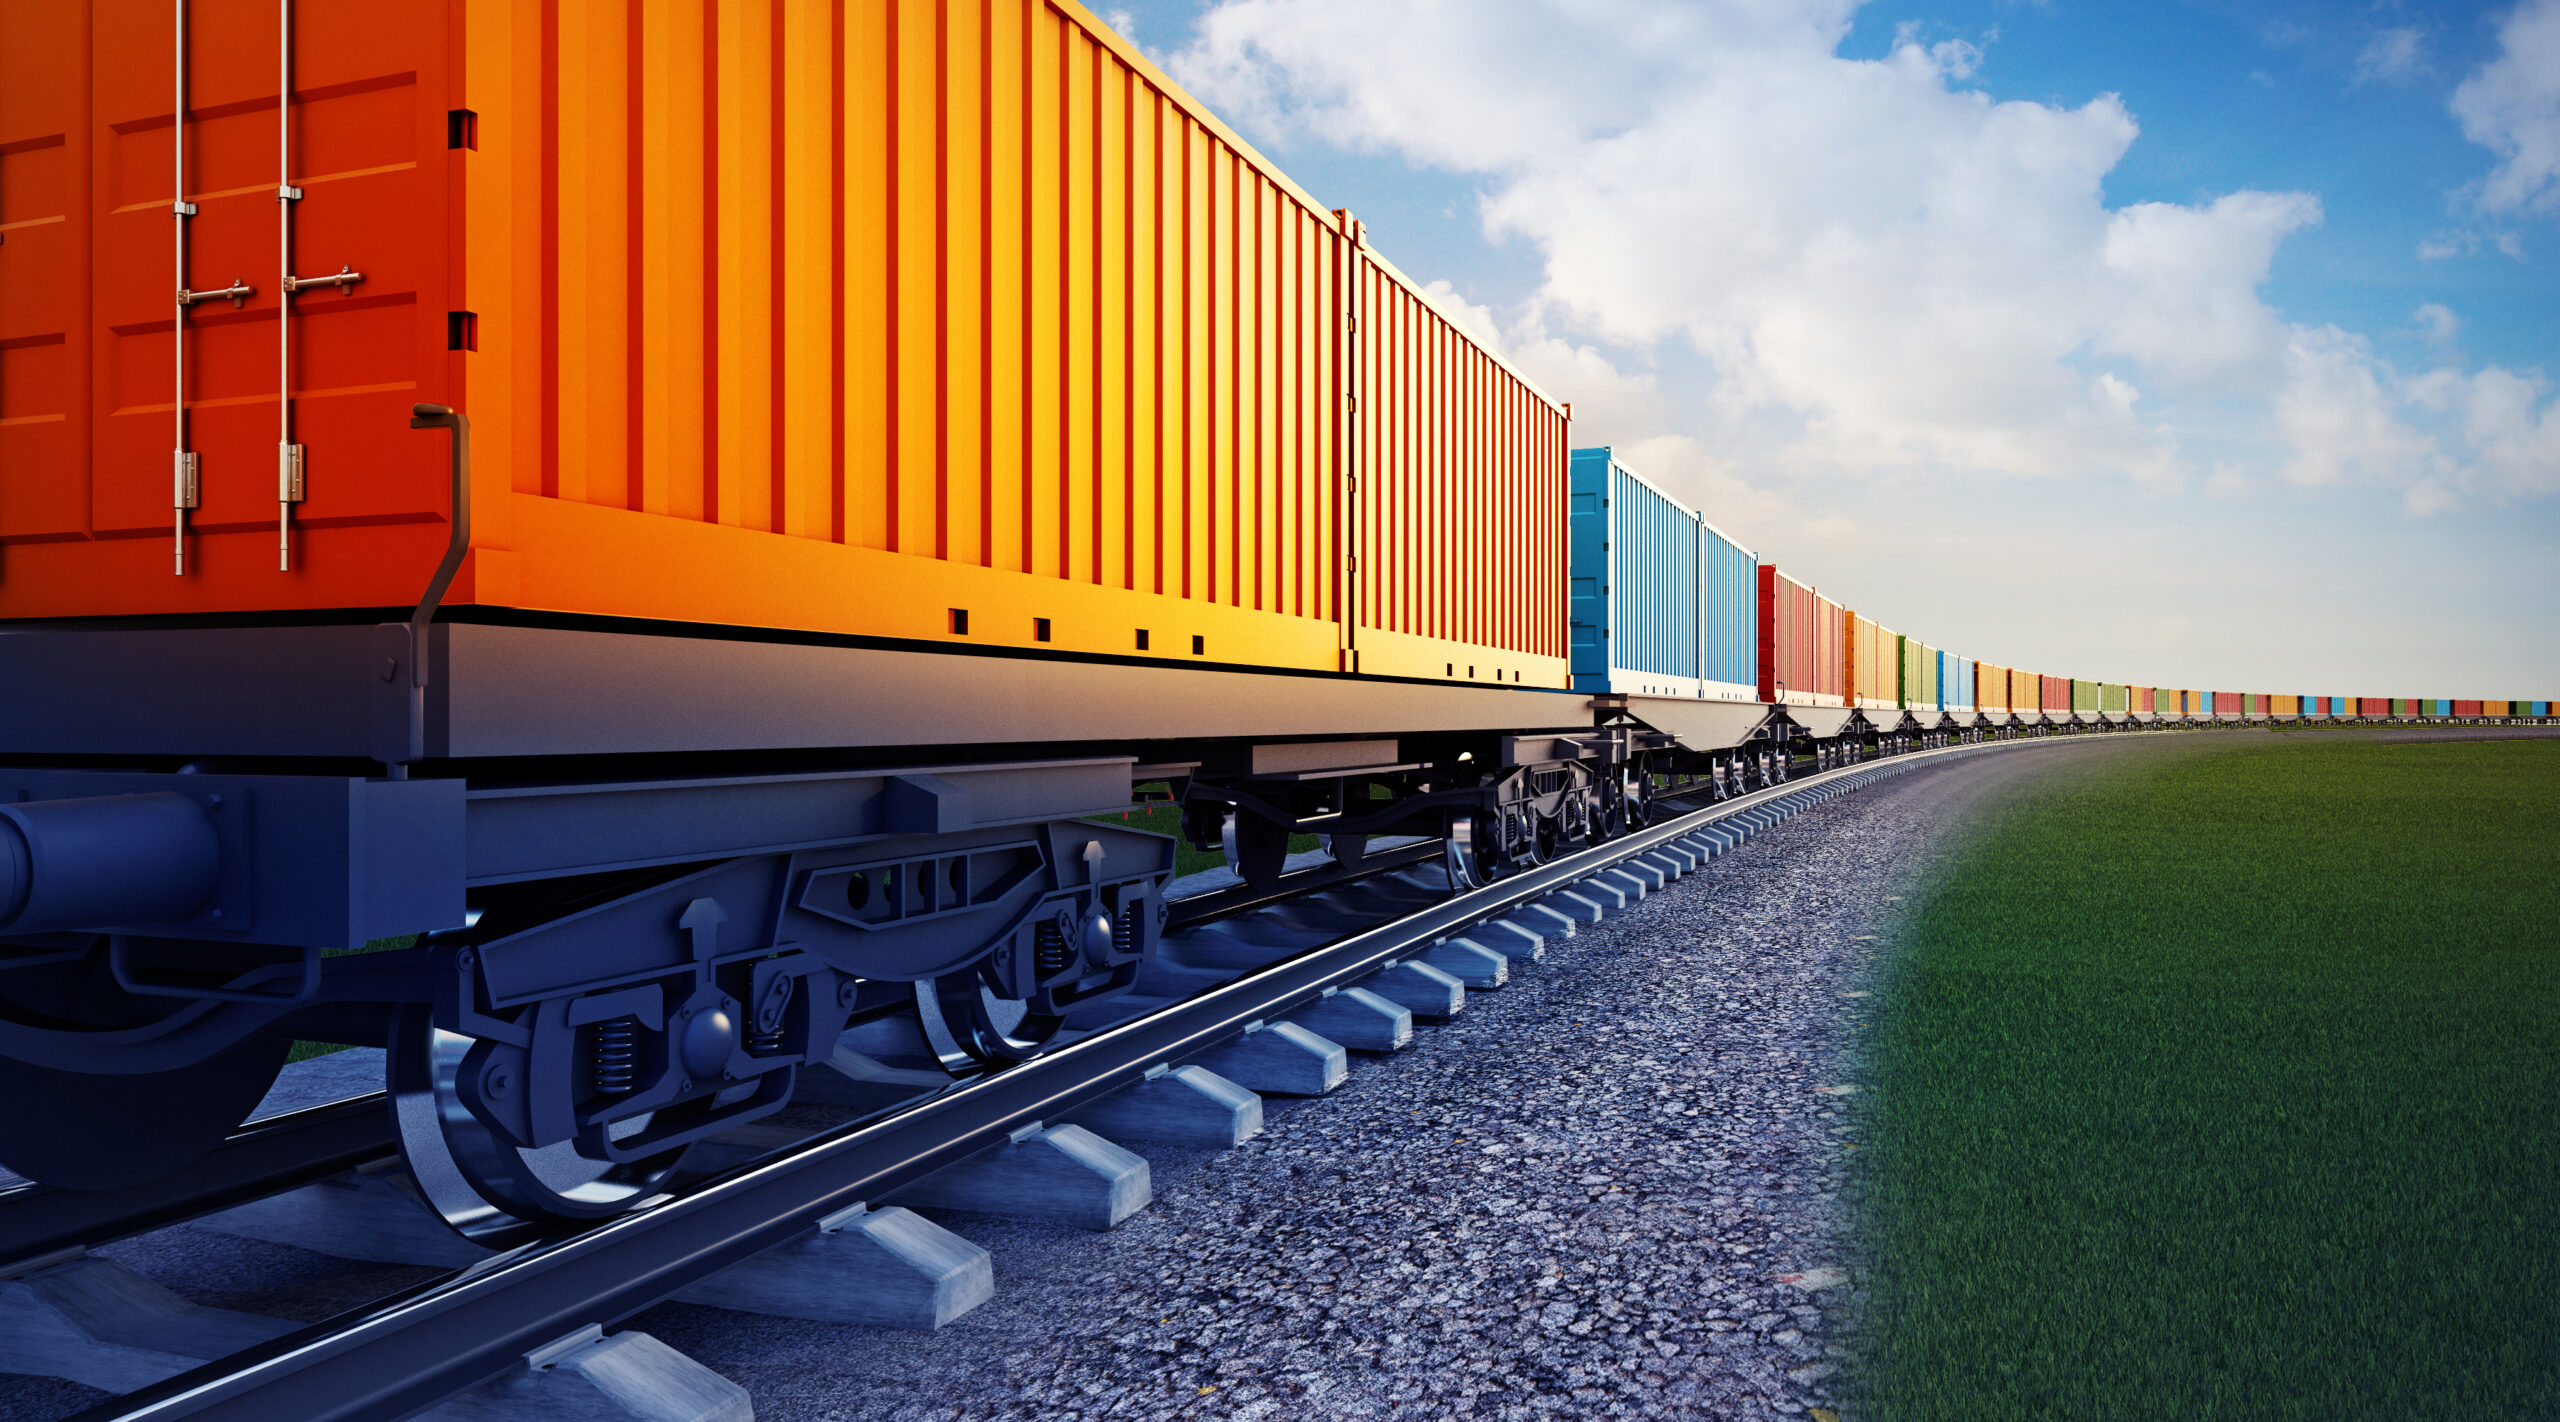 3d,Illustration,Of,Wagon,Of,Freight,Train,With,Containers,On